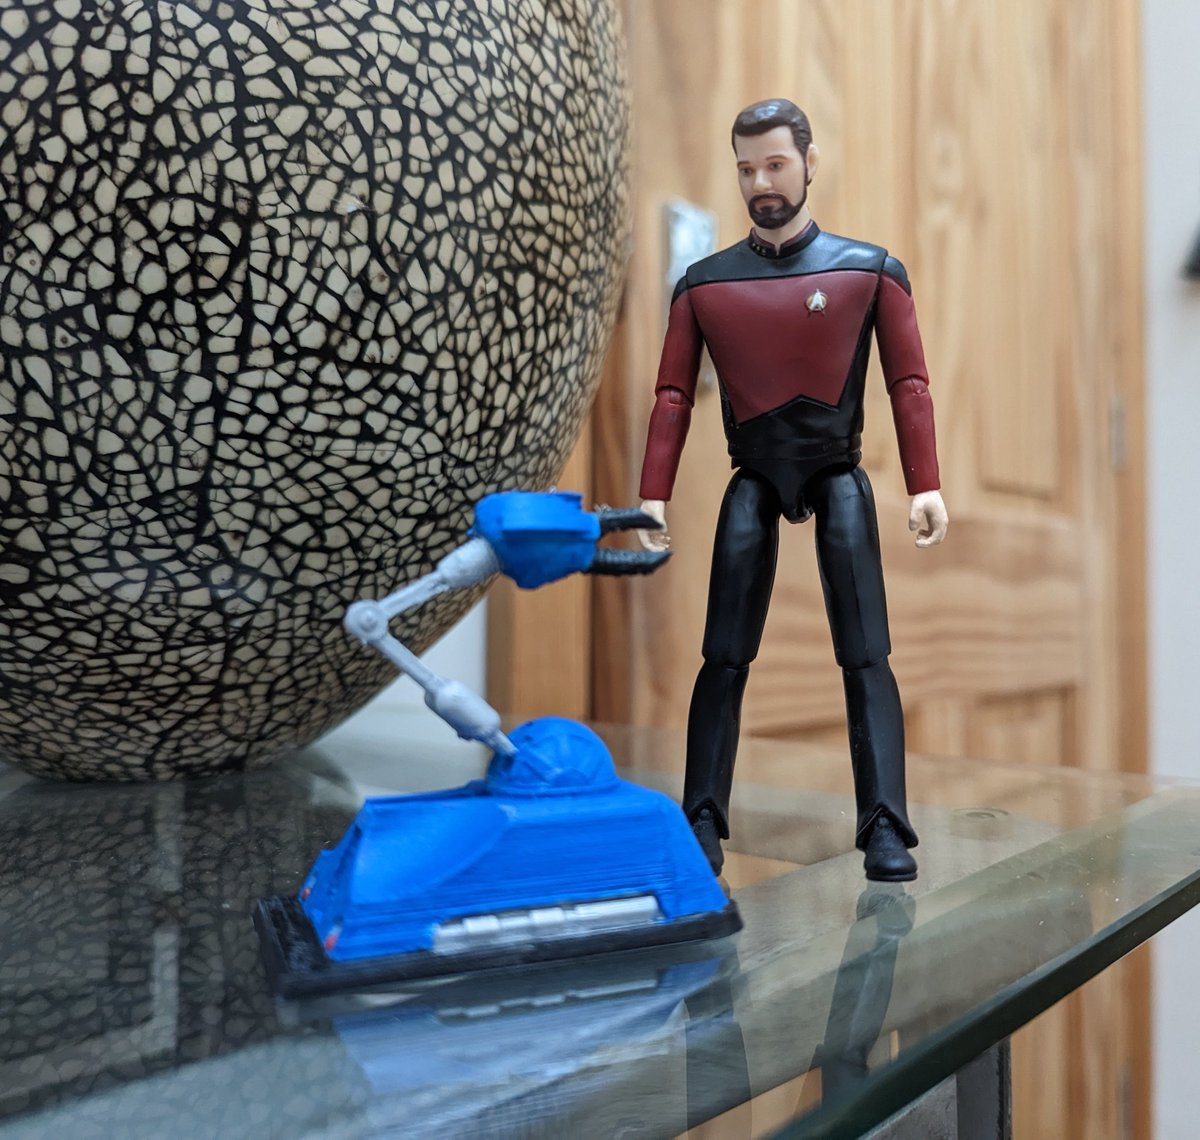 I am pleased to announce Riker has a new friend to help around the place. 

#StarTrek #RedDwarf